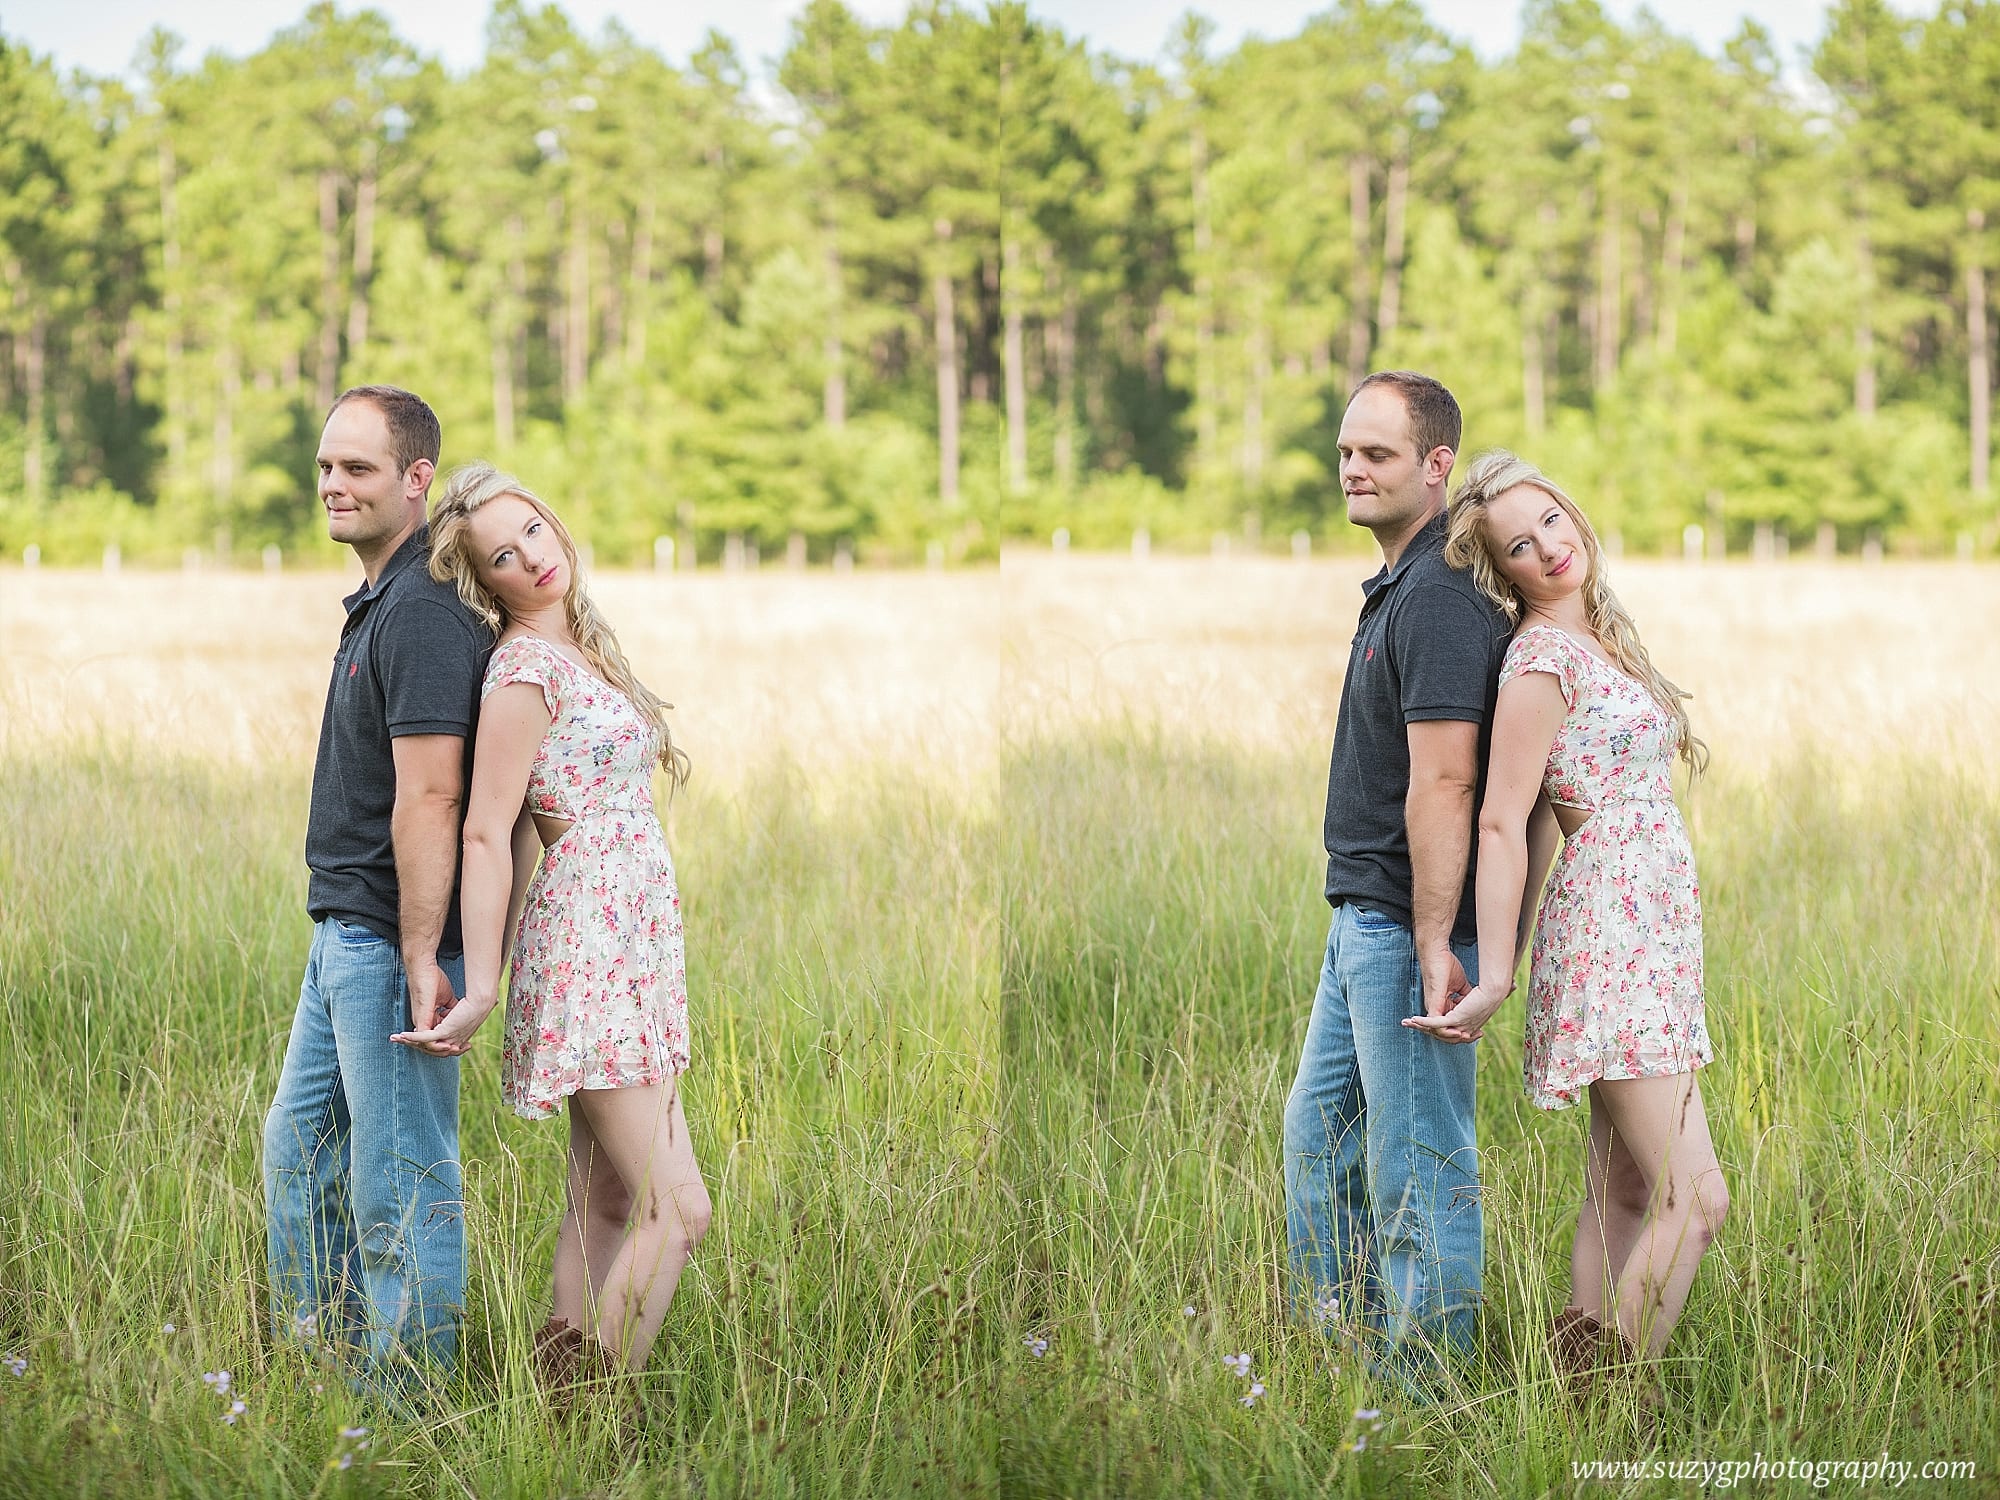 engagements-new orleans-texas-baton rouge-lake charles-suzy g-photography-suzygphotography_0014